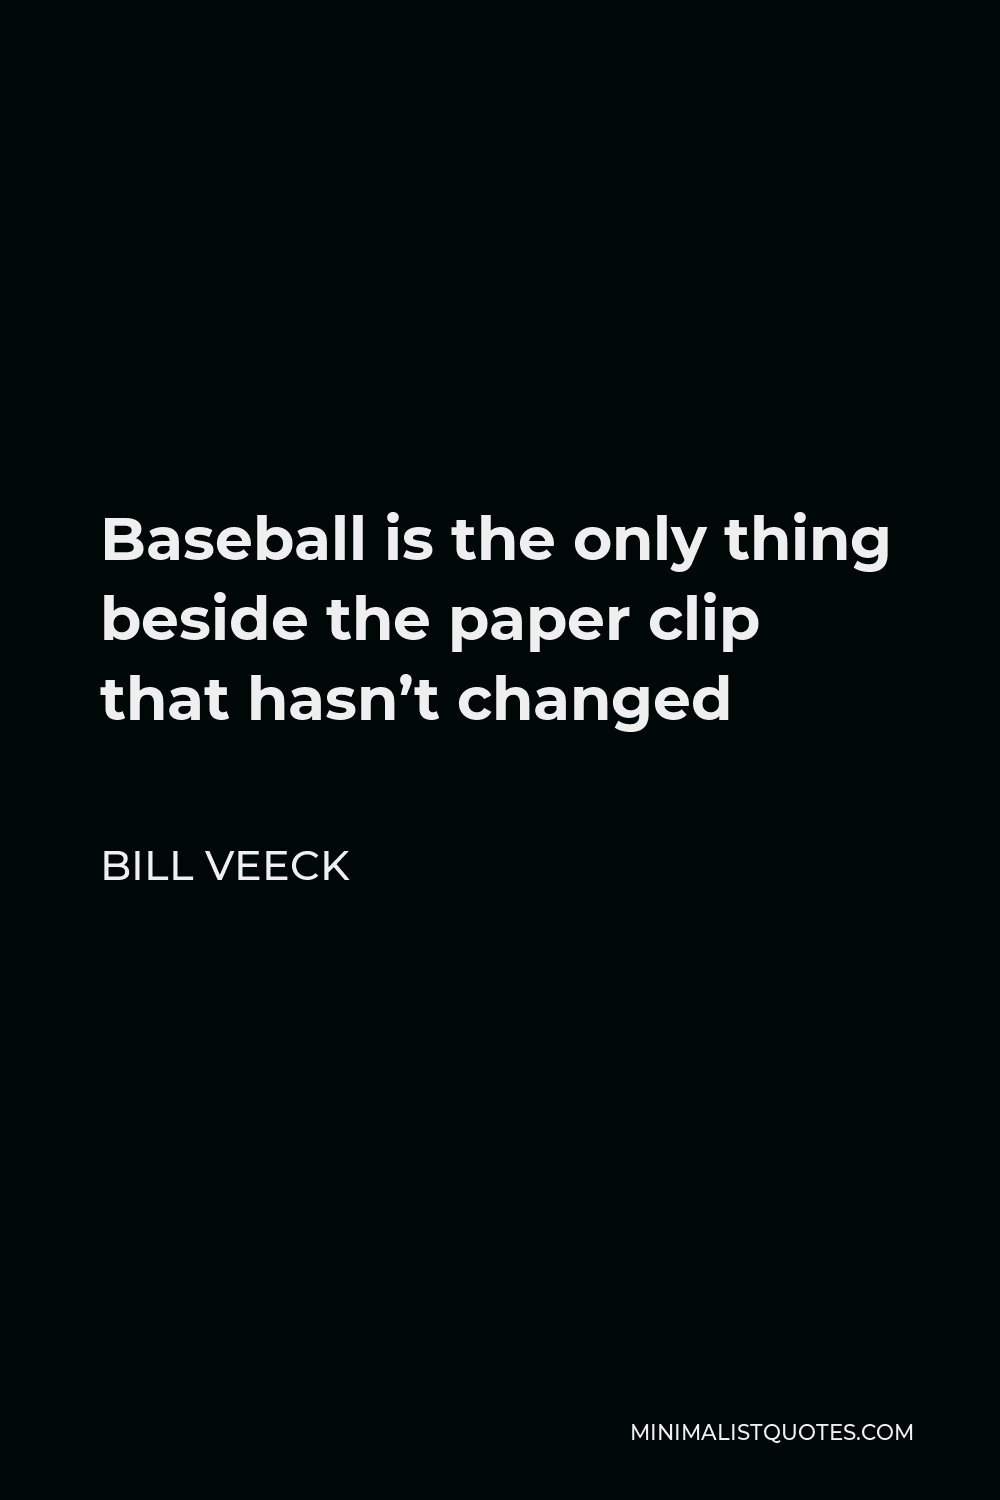 Bill Veeck Quote - Baseball is the only thing beside the paper clip that hasn’t changed